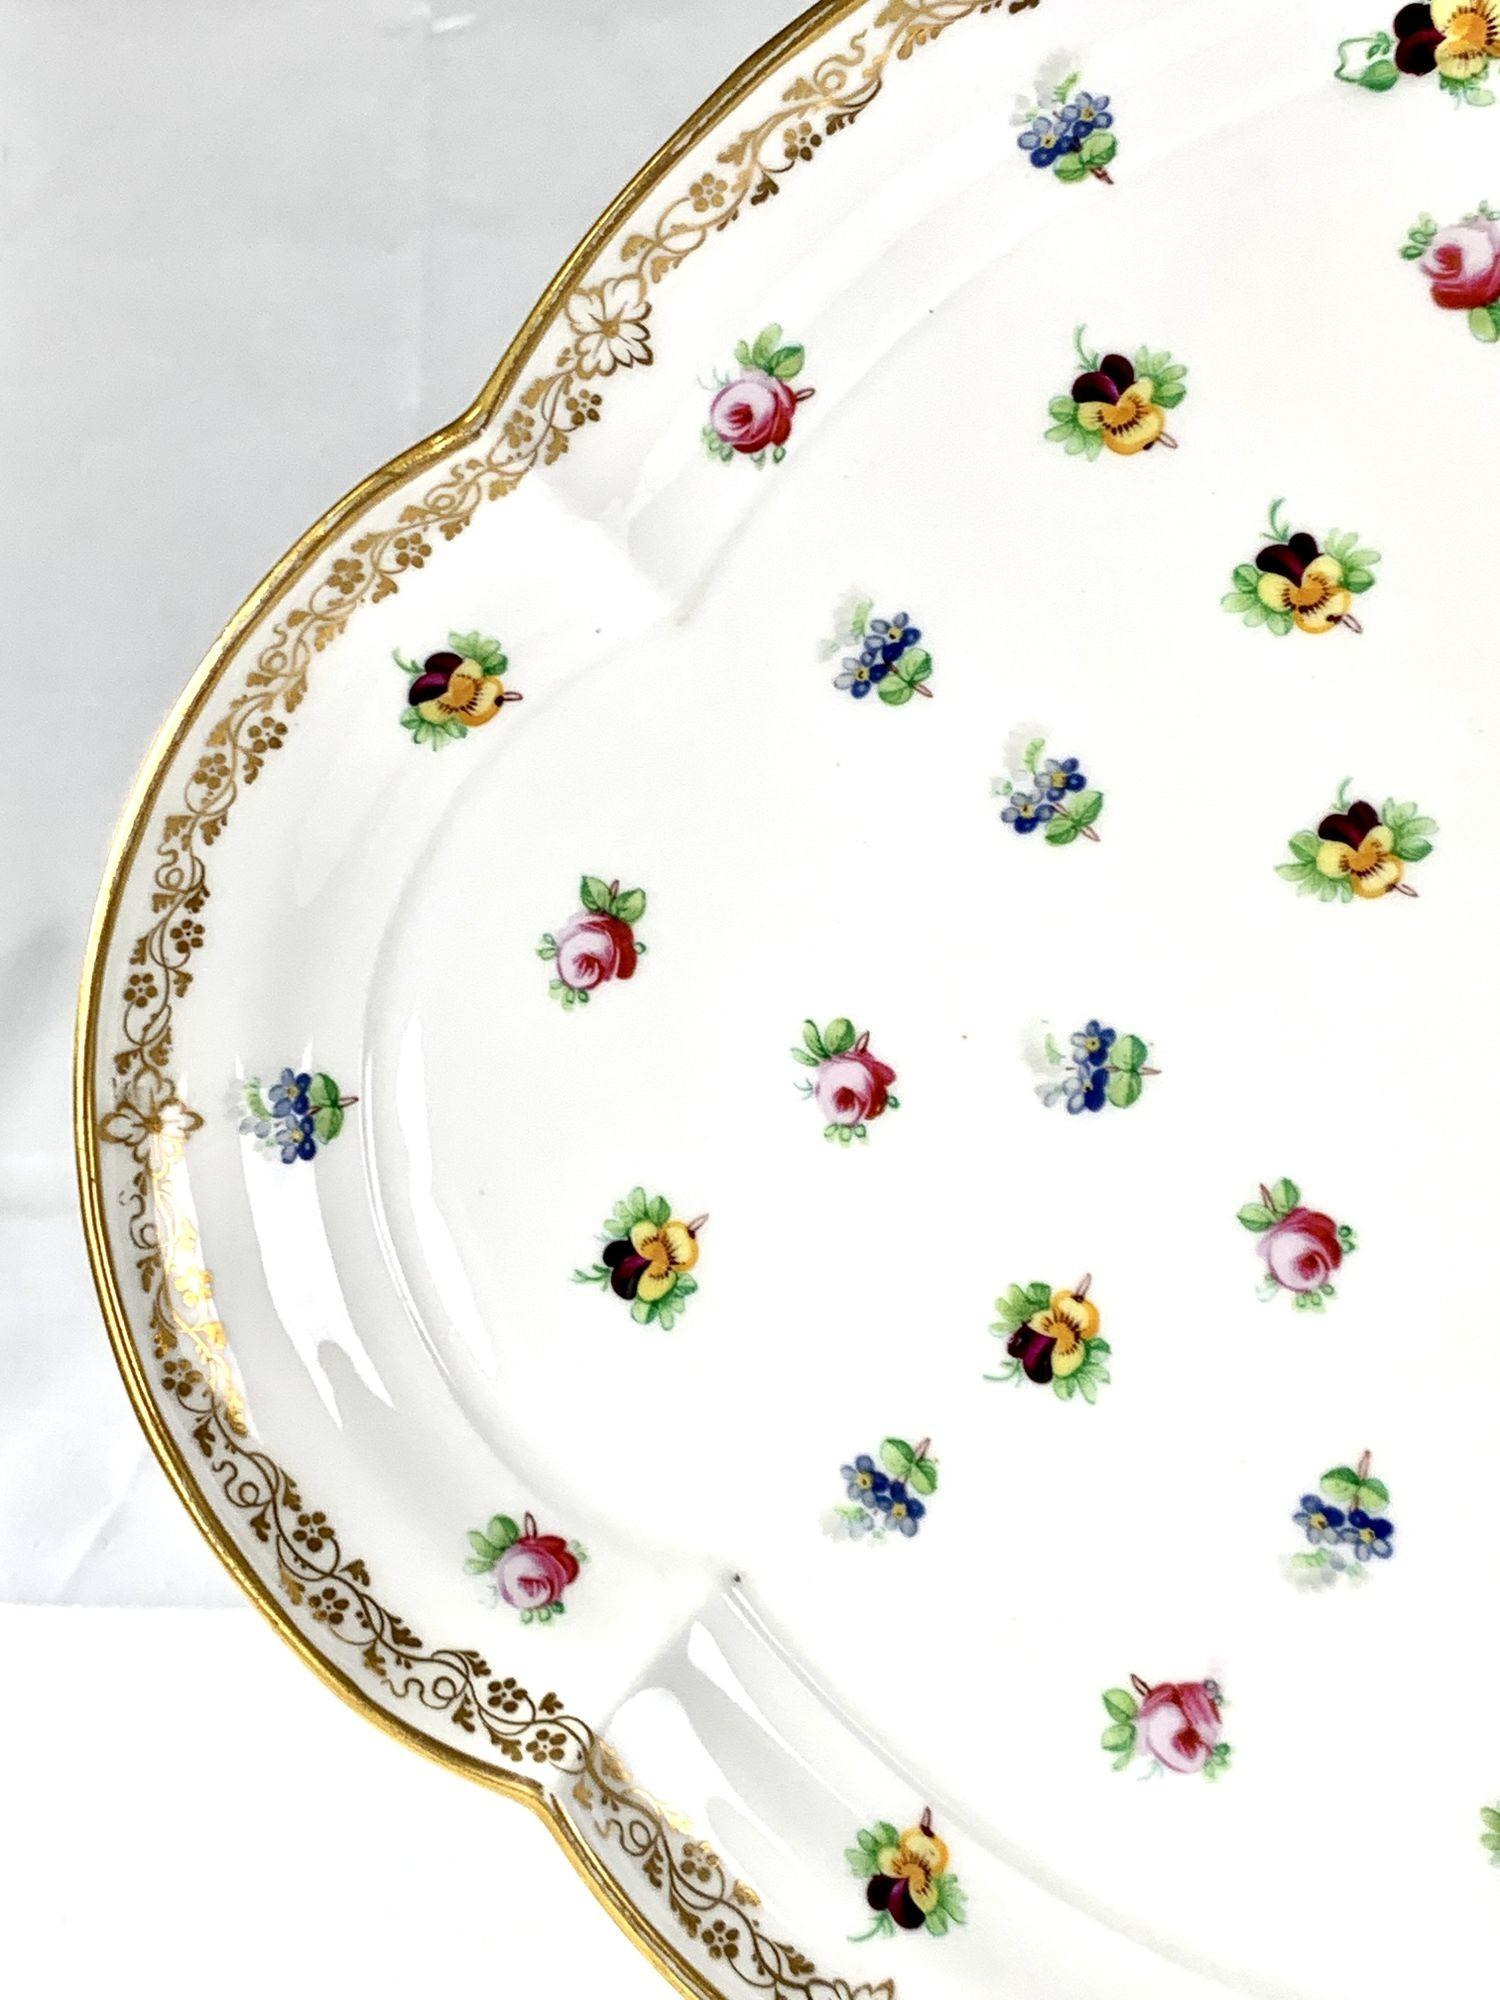 Minton Platter England Mid-19th Century Decorated Roses Pansies Forget Me Nots 4